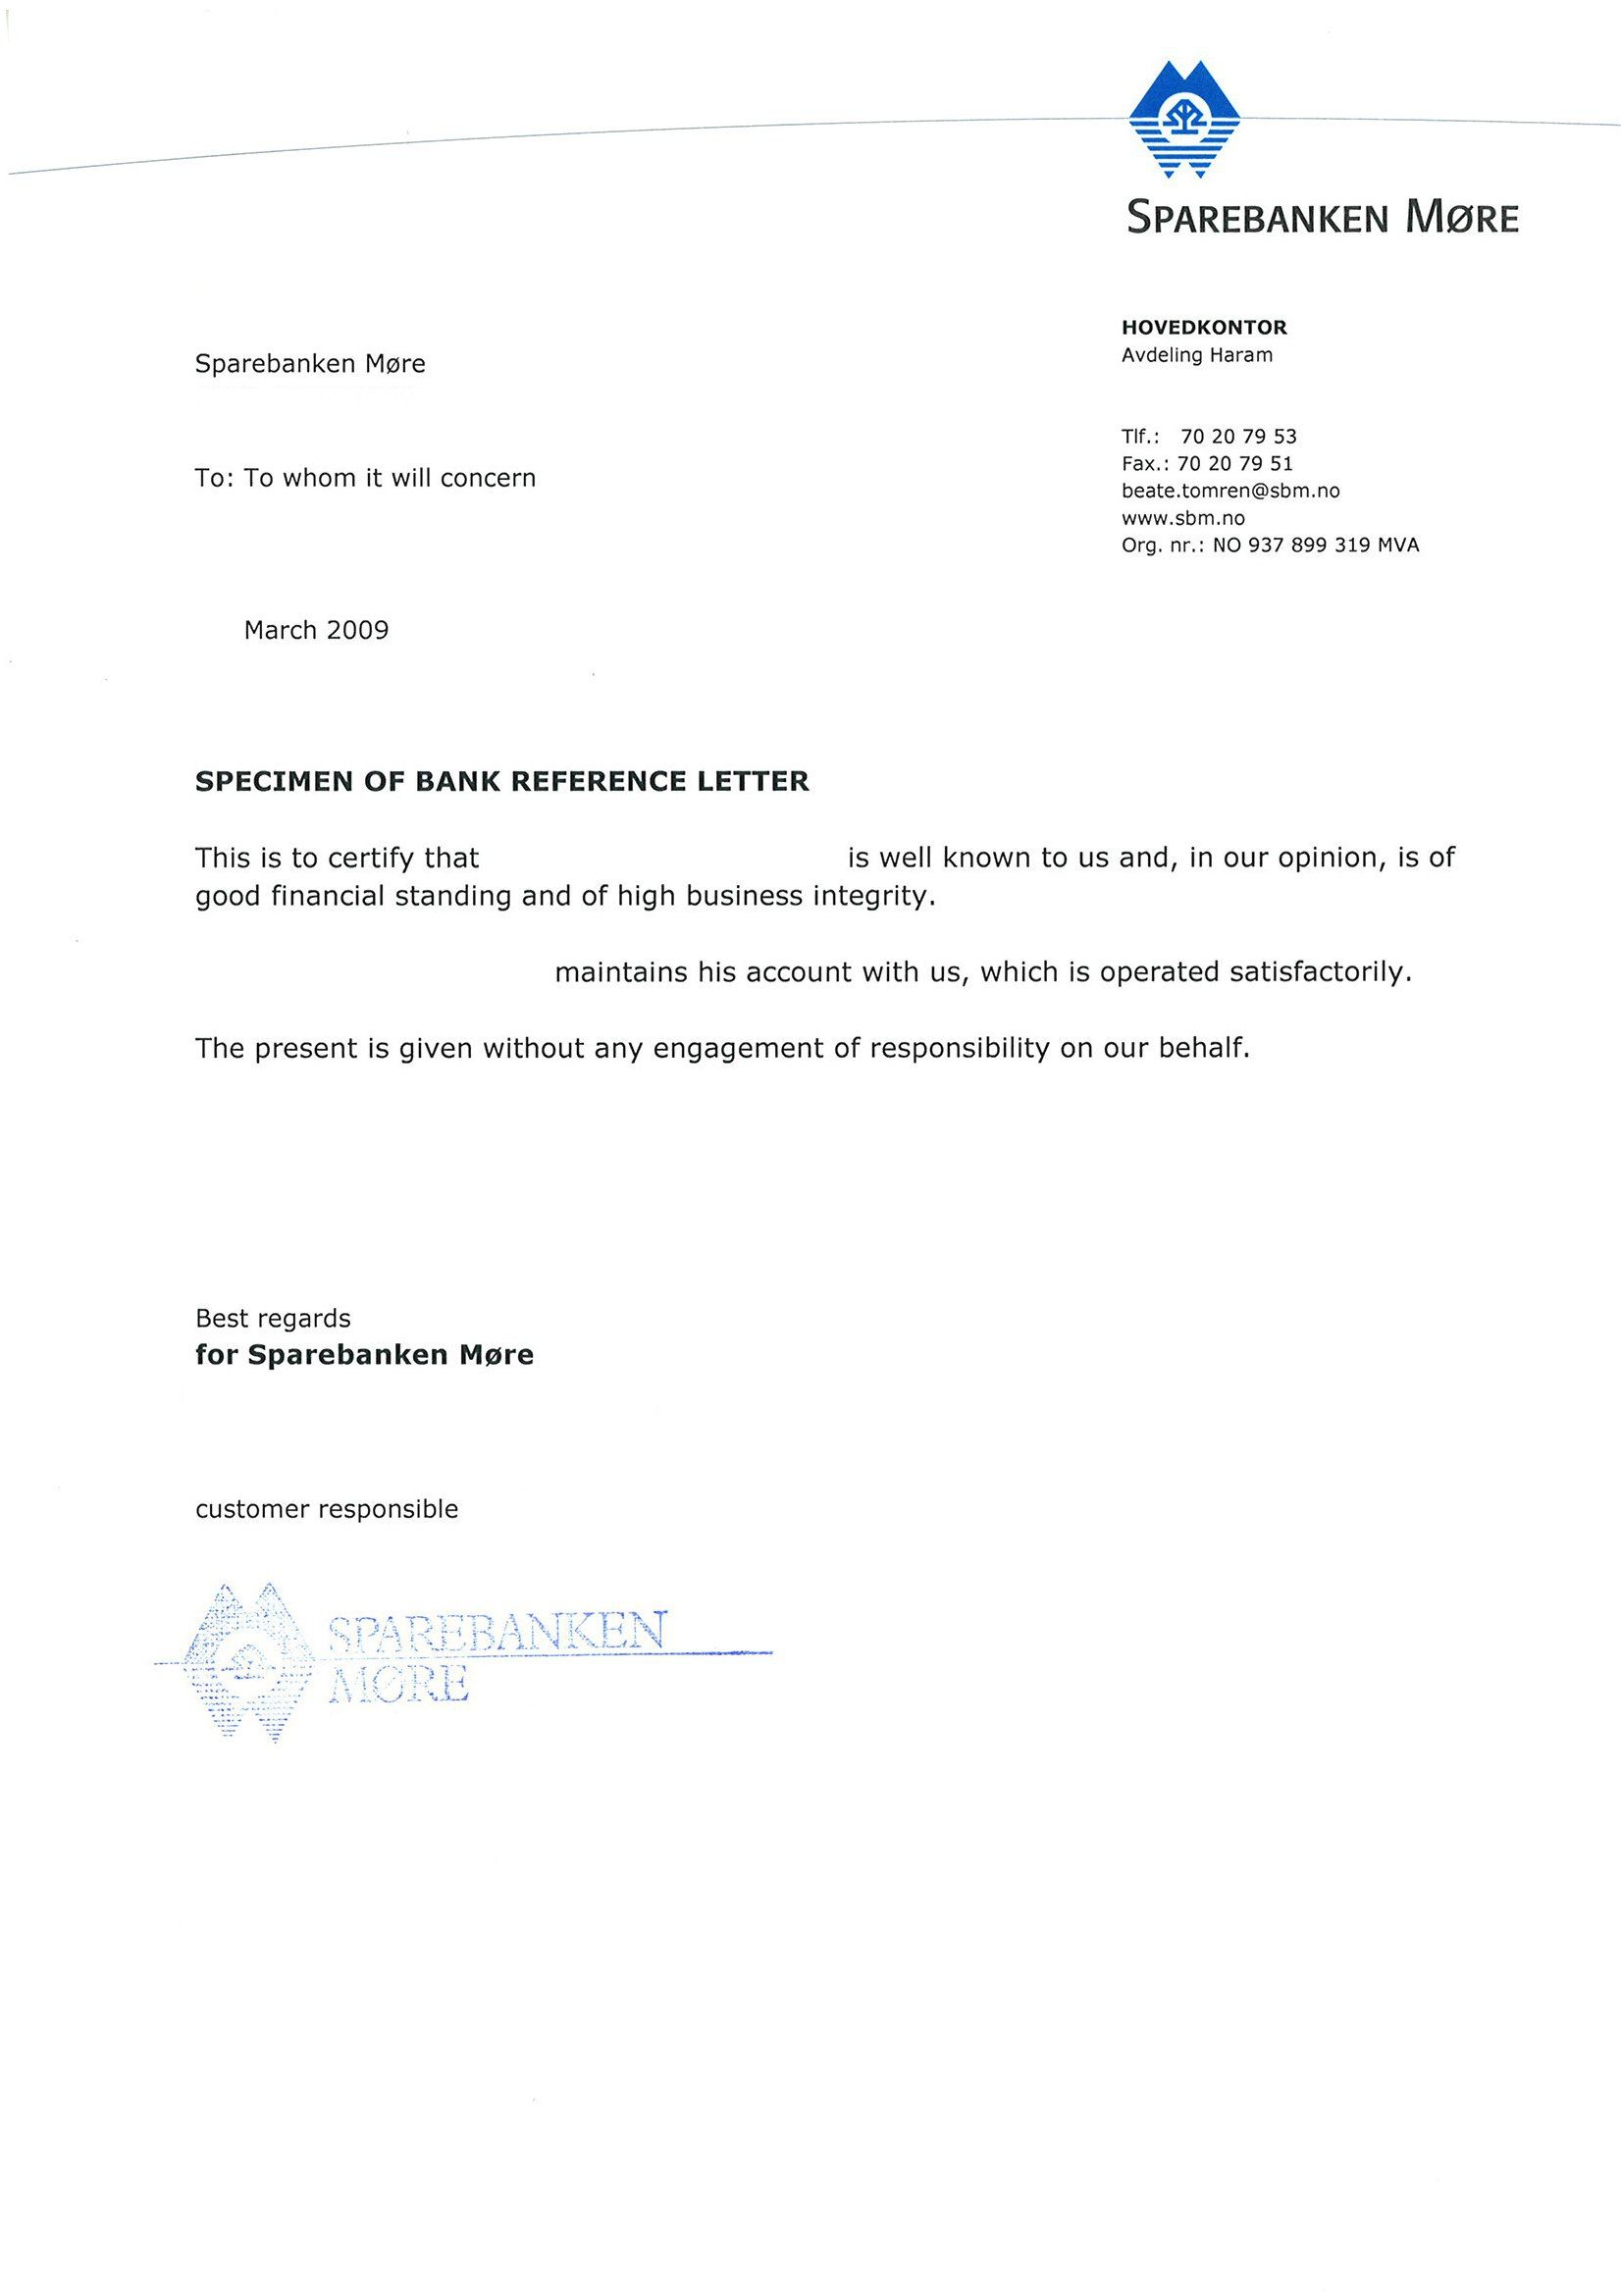 Bank Referencepersonal Recommendation Letter Cover Letter within sizing 1652 X 2340